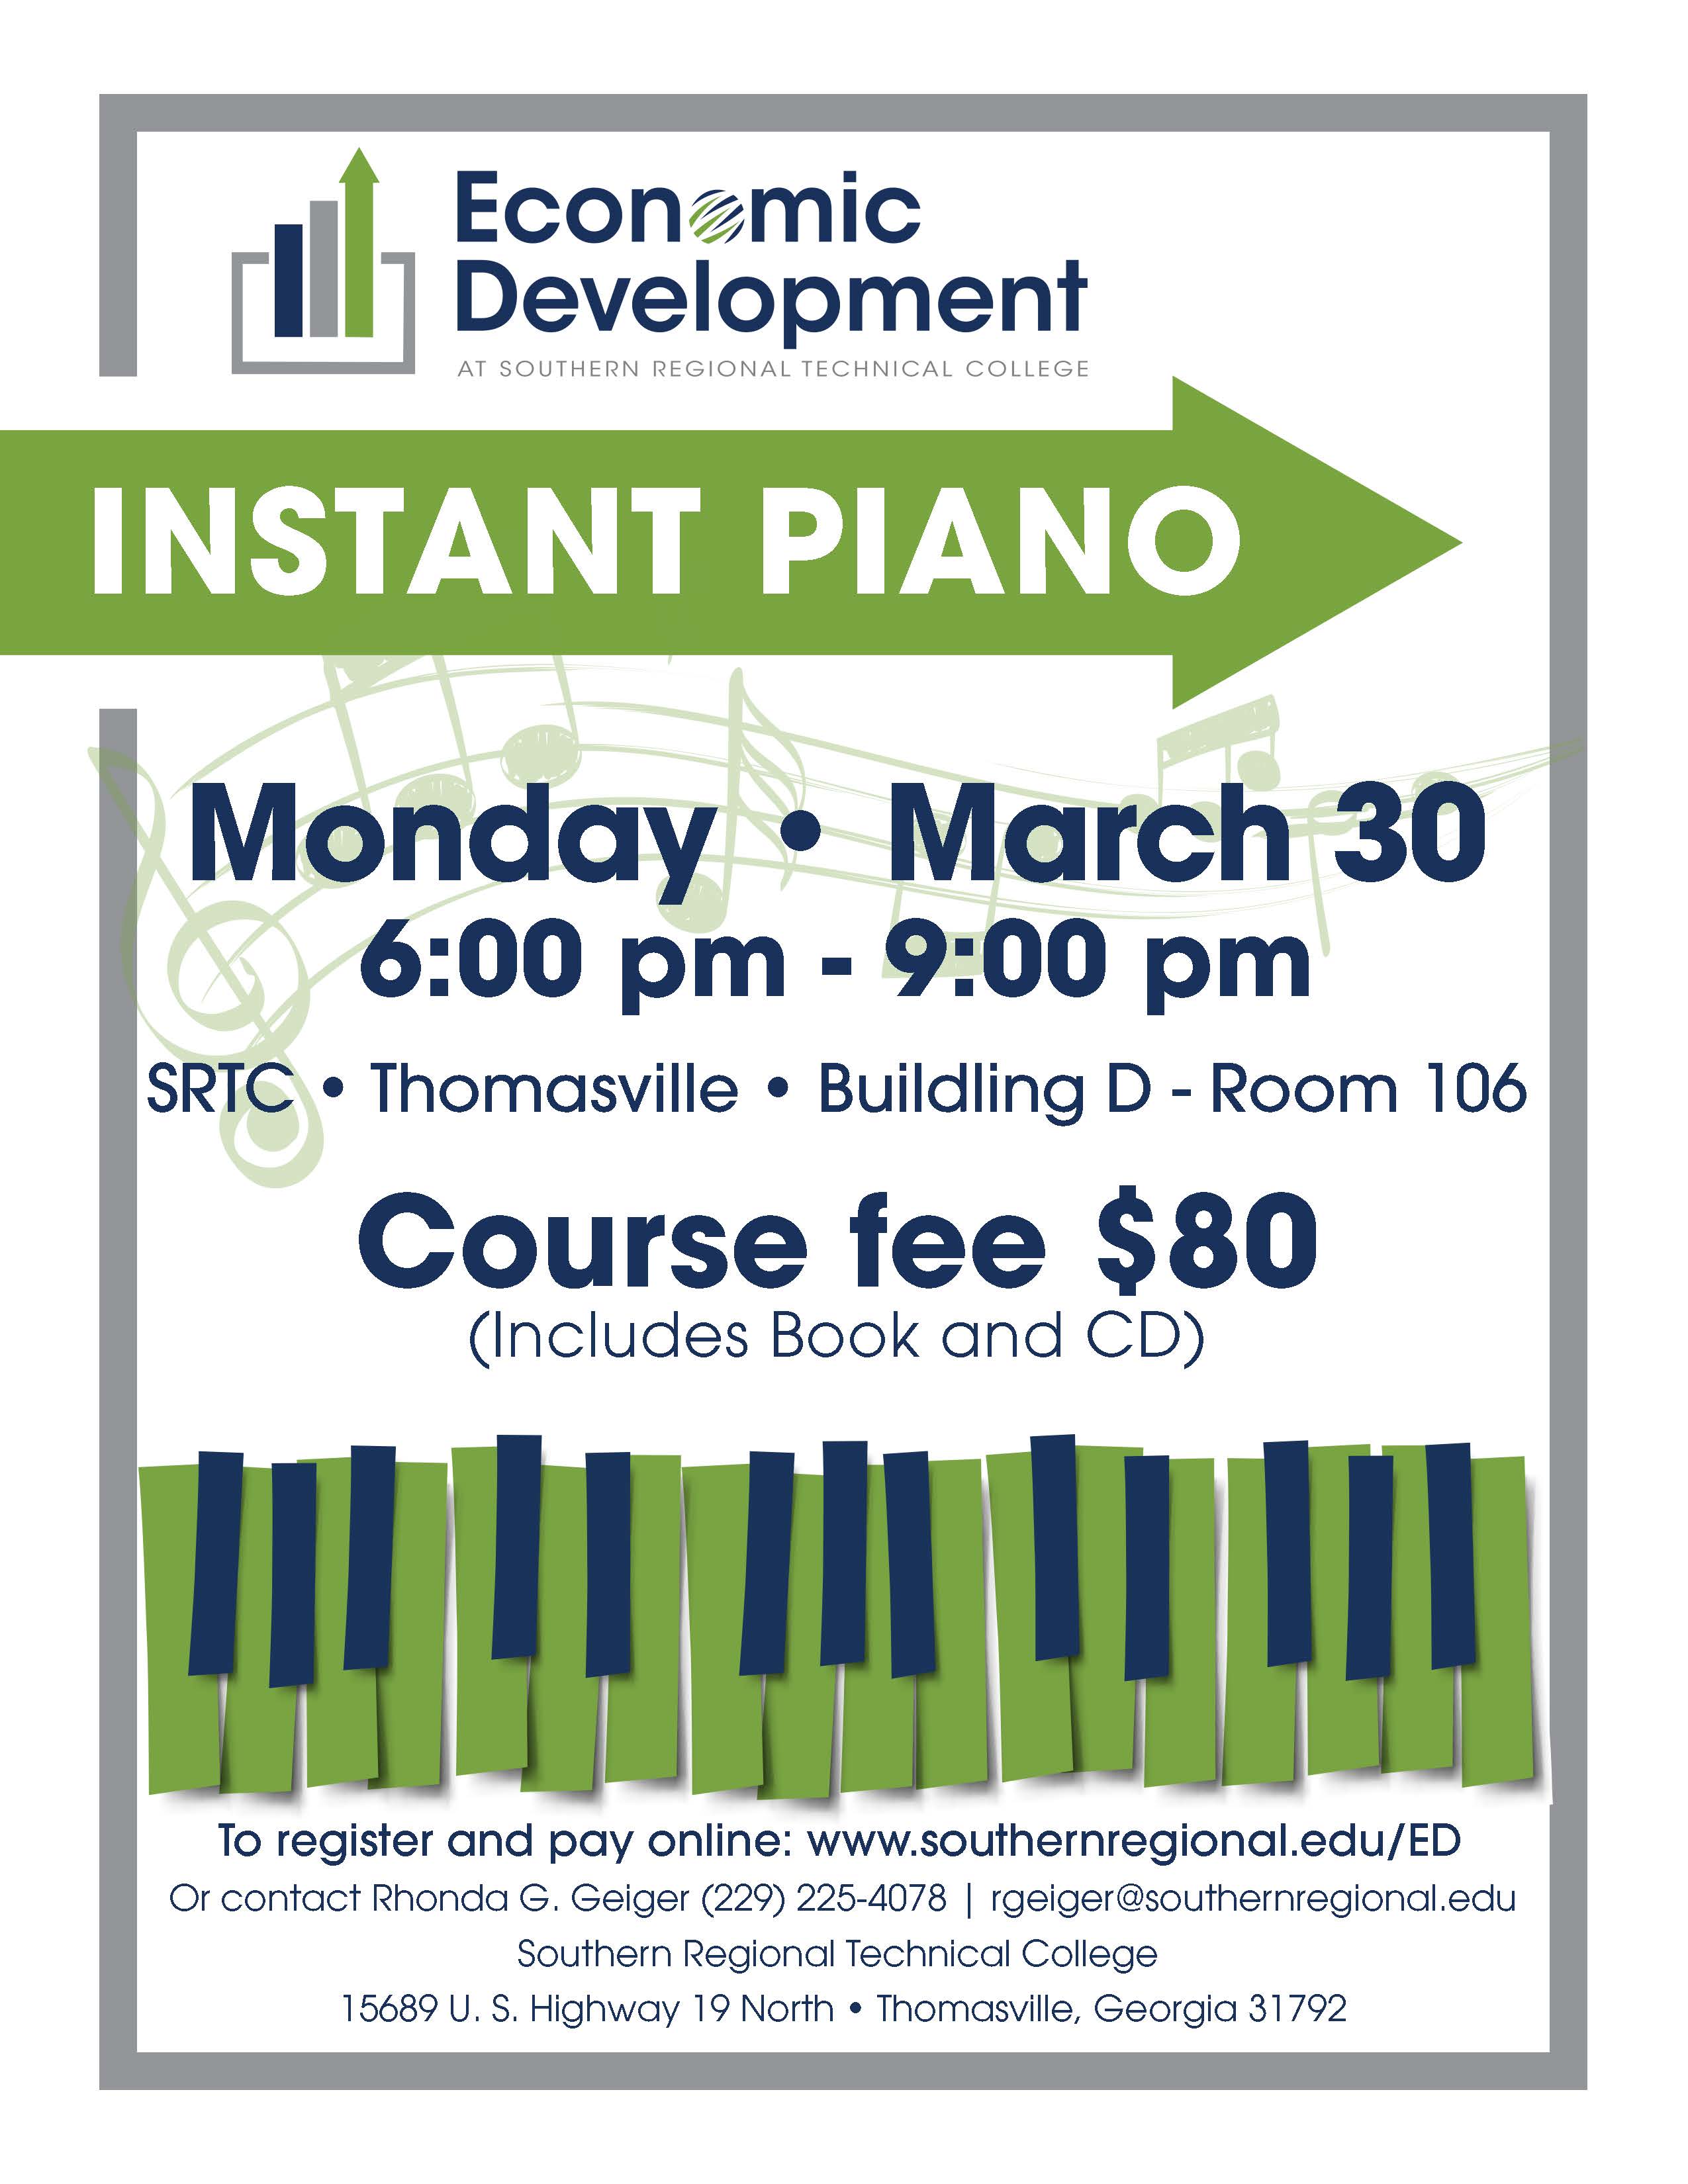 Photo for SRTC Thomasville to host Instant Piano course